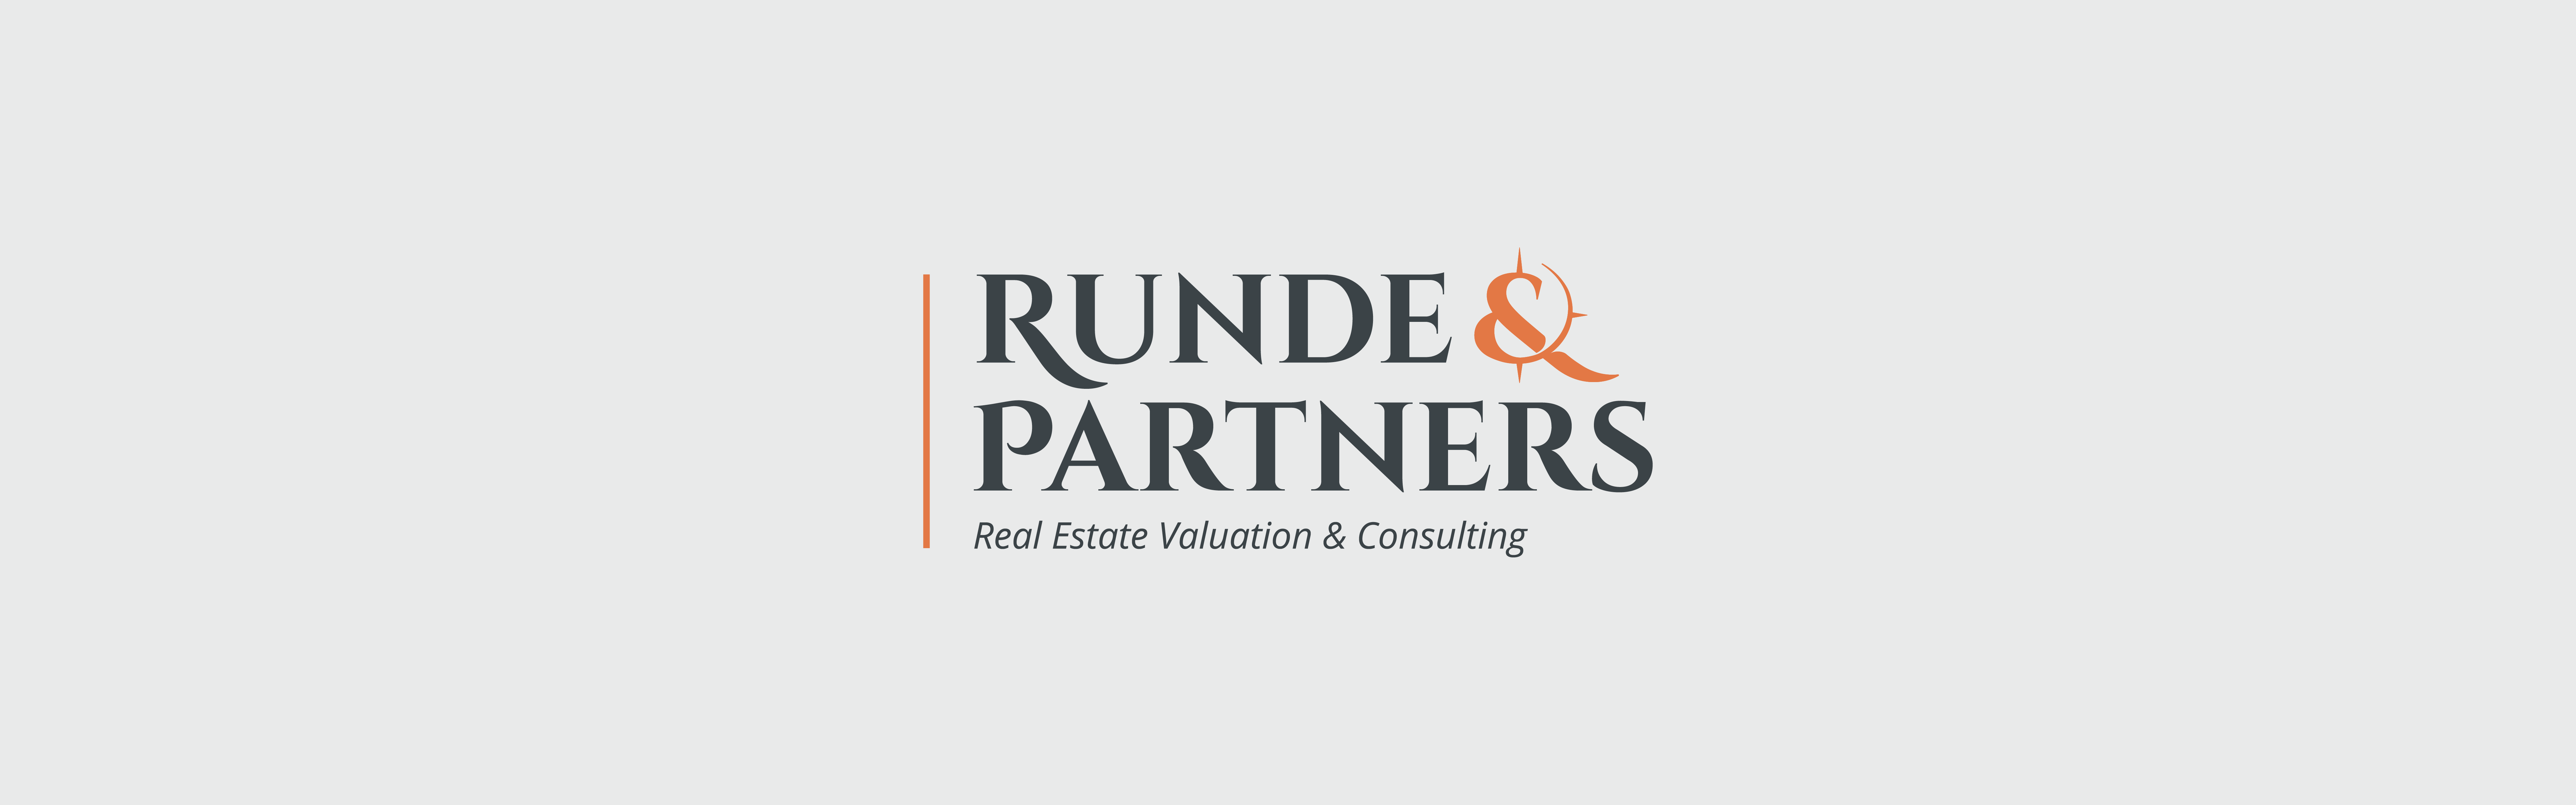 Logo of Runde & Partners, a company specializing in real estate valuation & consulting.